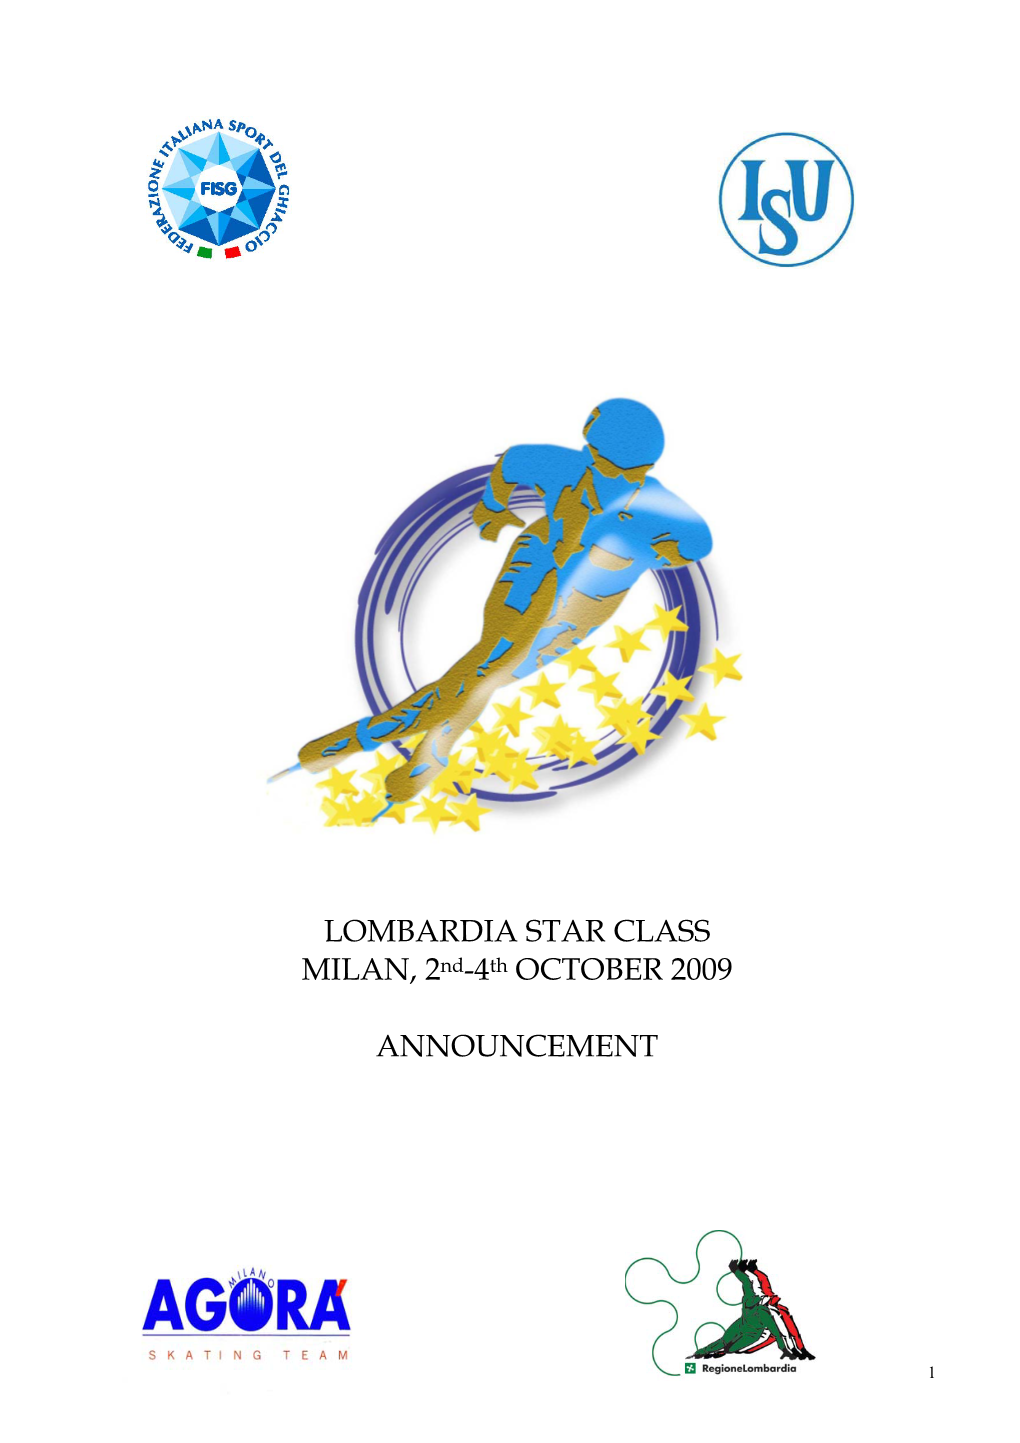 LOMBARDIA STAR CLASS MILAN, 2Nd-4Th OCTOBER 2009 ANNOUNCEMENT